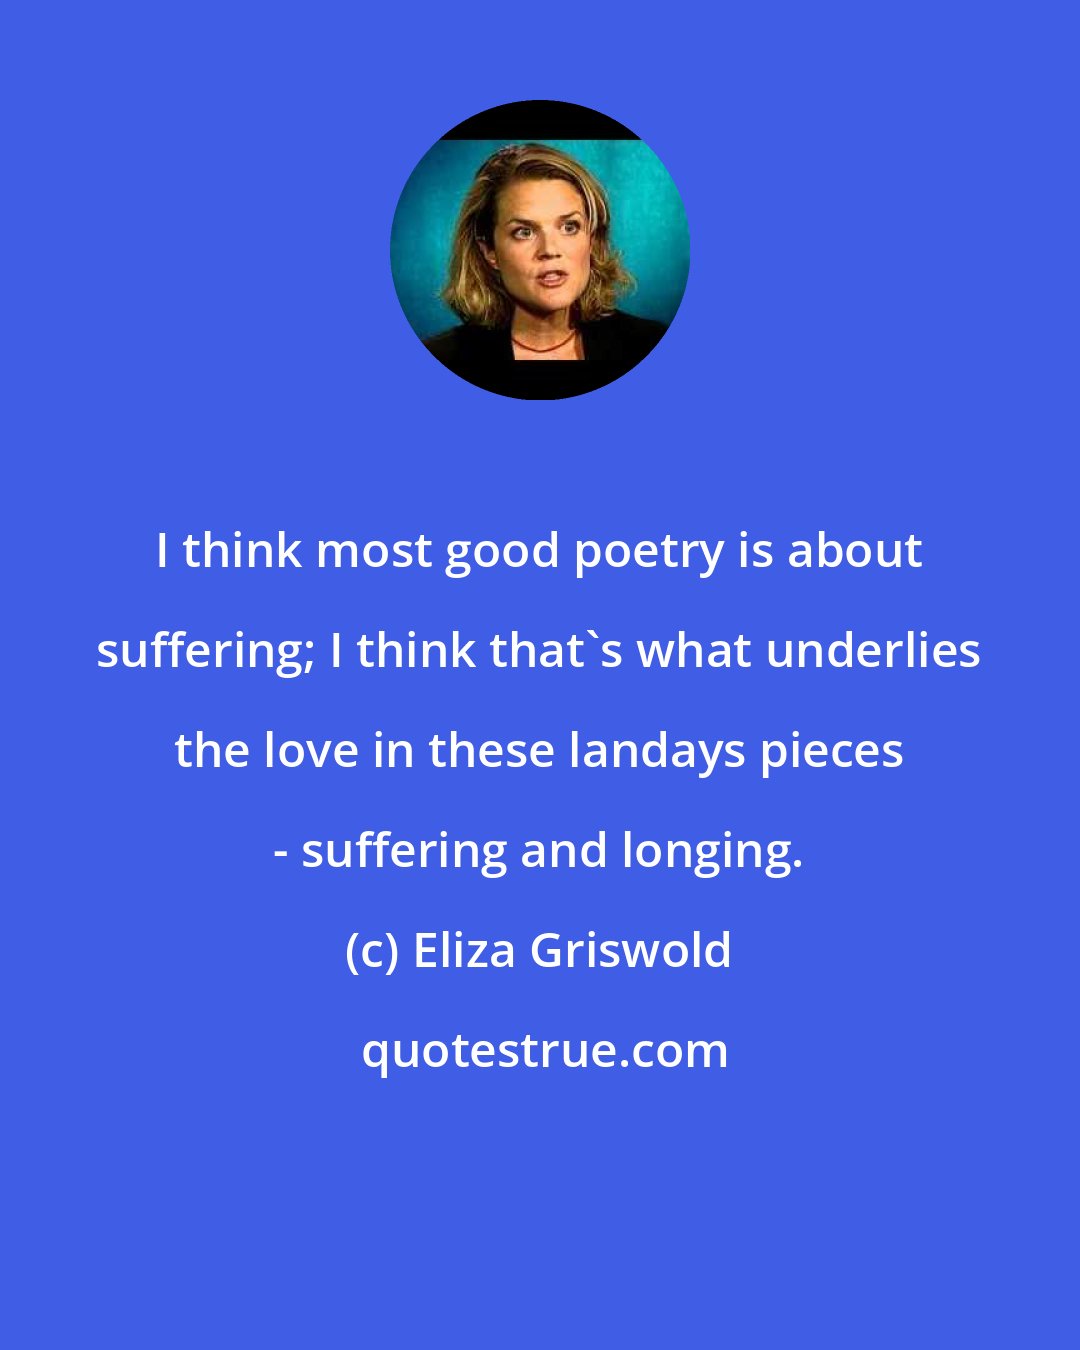 Eliza Griswold: I think most good poetry is about suffering; I think that's what underlies the love in these landays pieces - suffering and longing.